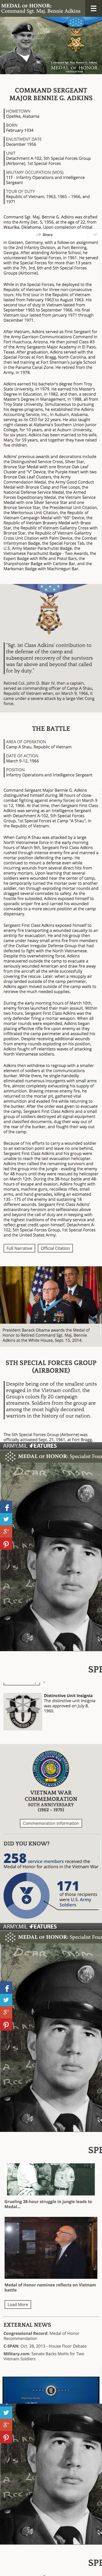 medal of honor U.S. Army Military White House Vietname war War Website Responsive battle Medal award #cips_awards_citizens #CIPS_Awards_Heroes #CIPS_awards_cross-channel